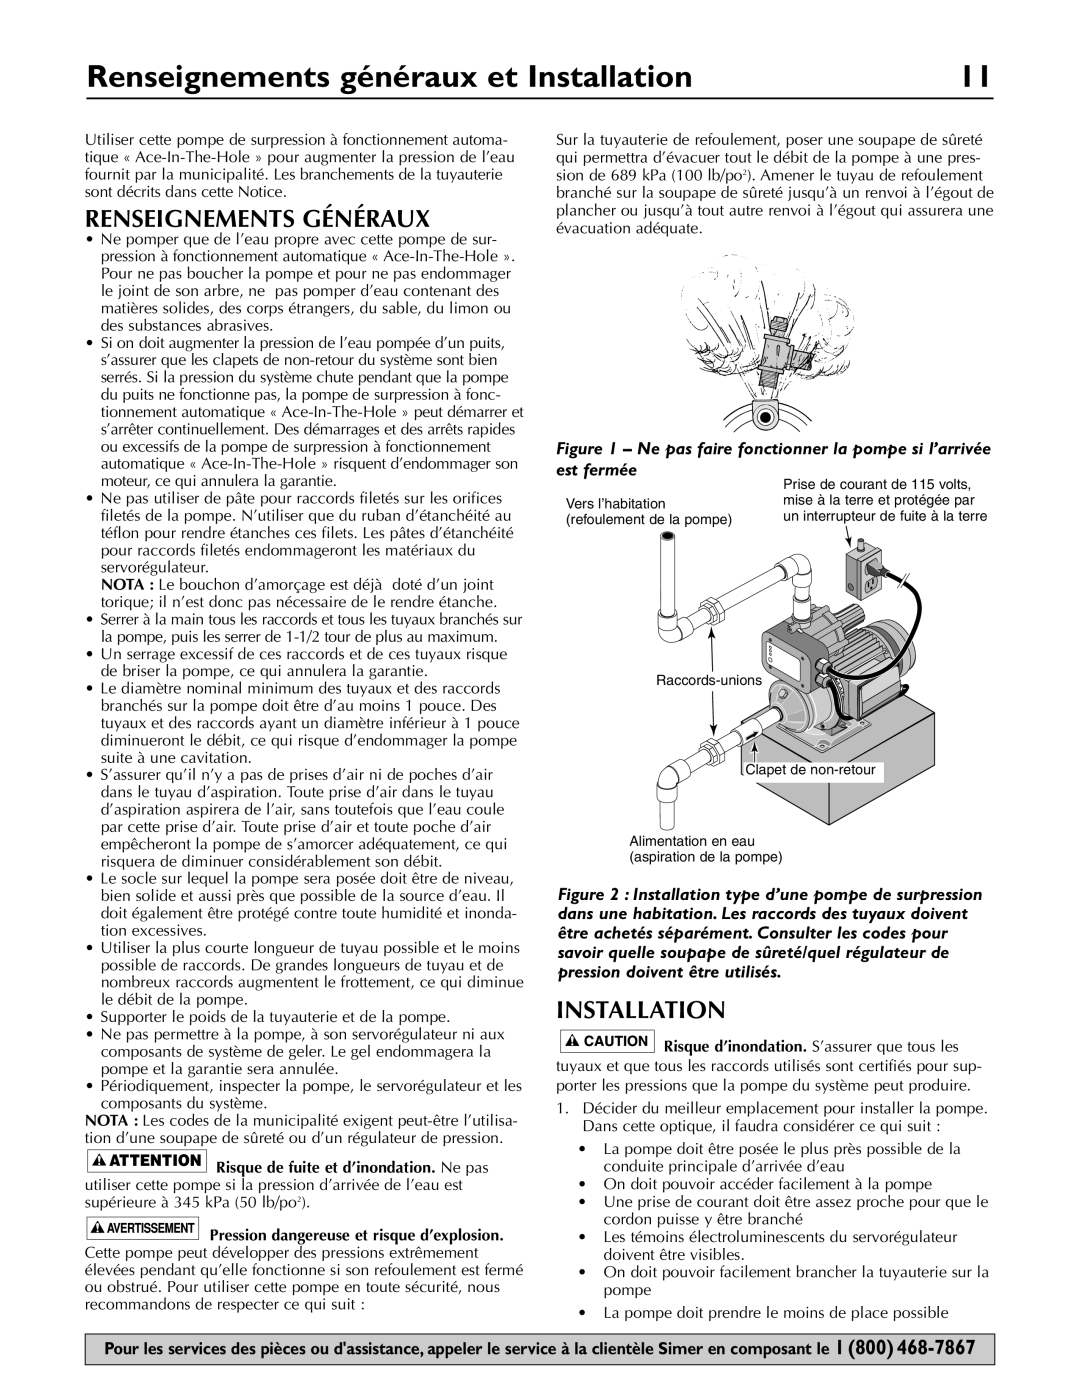 Simer Pumps 3075SS-01 owner manual Renseignements généraux et Installation, Renseignements Généraux 